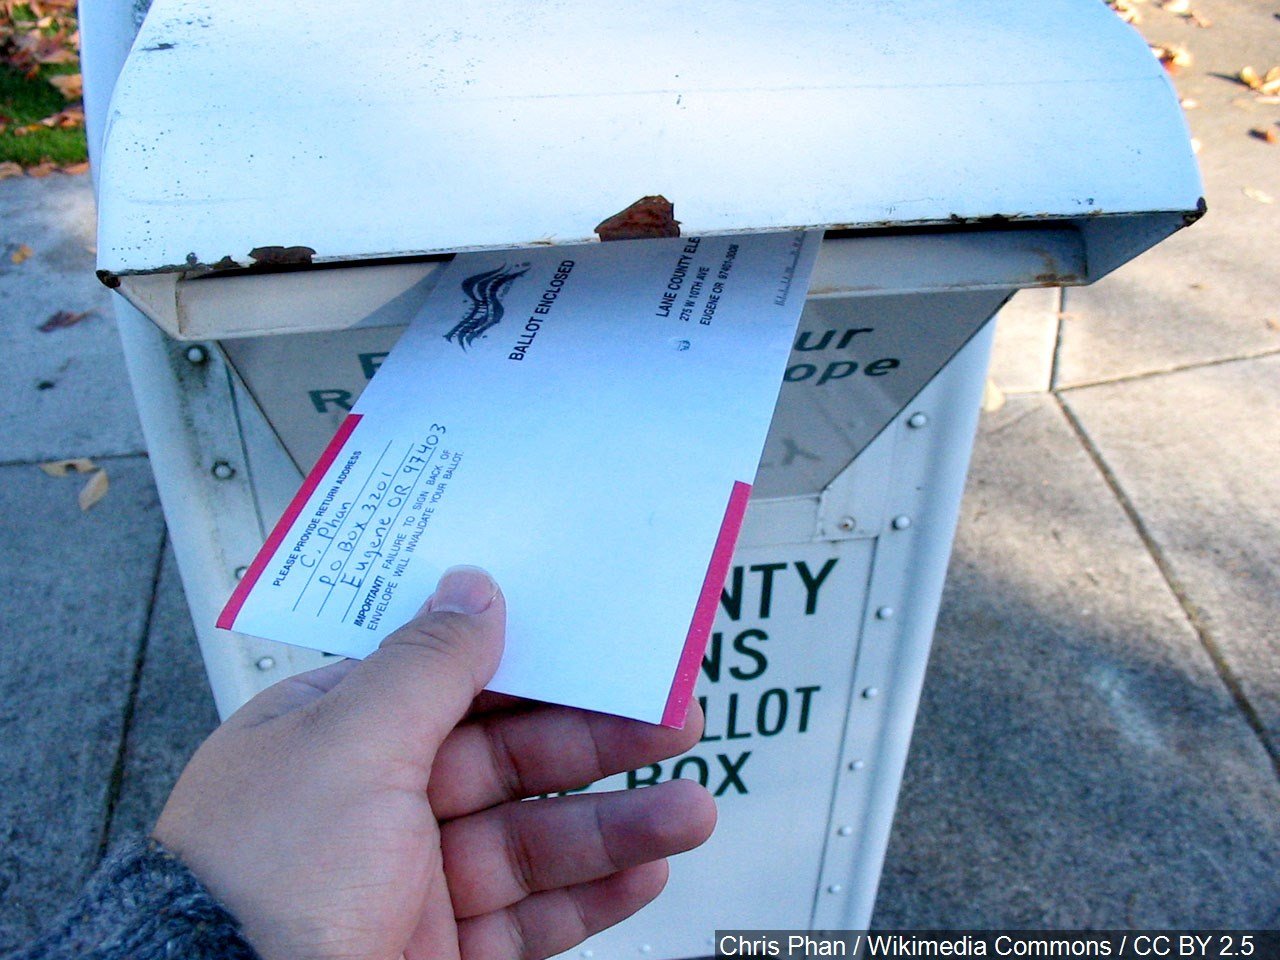 The bill co-sponsored by State Sen. Todd Kaminsky would provide voters who do not want to rely on the mail service an additional option to return their absentee ballots within their county or city of residence.